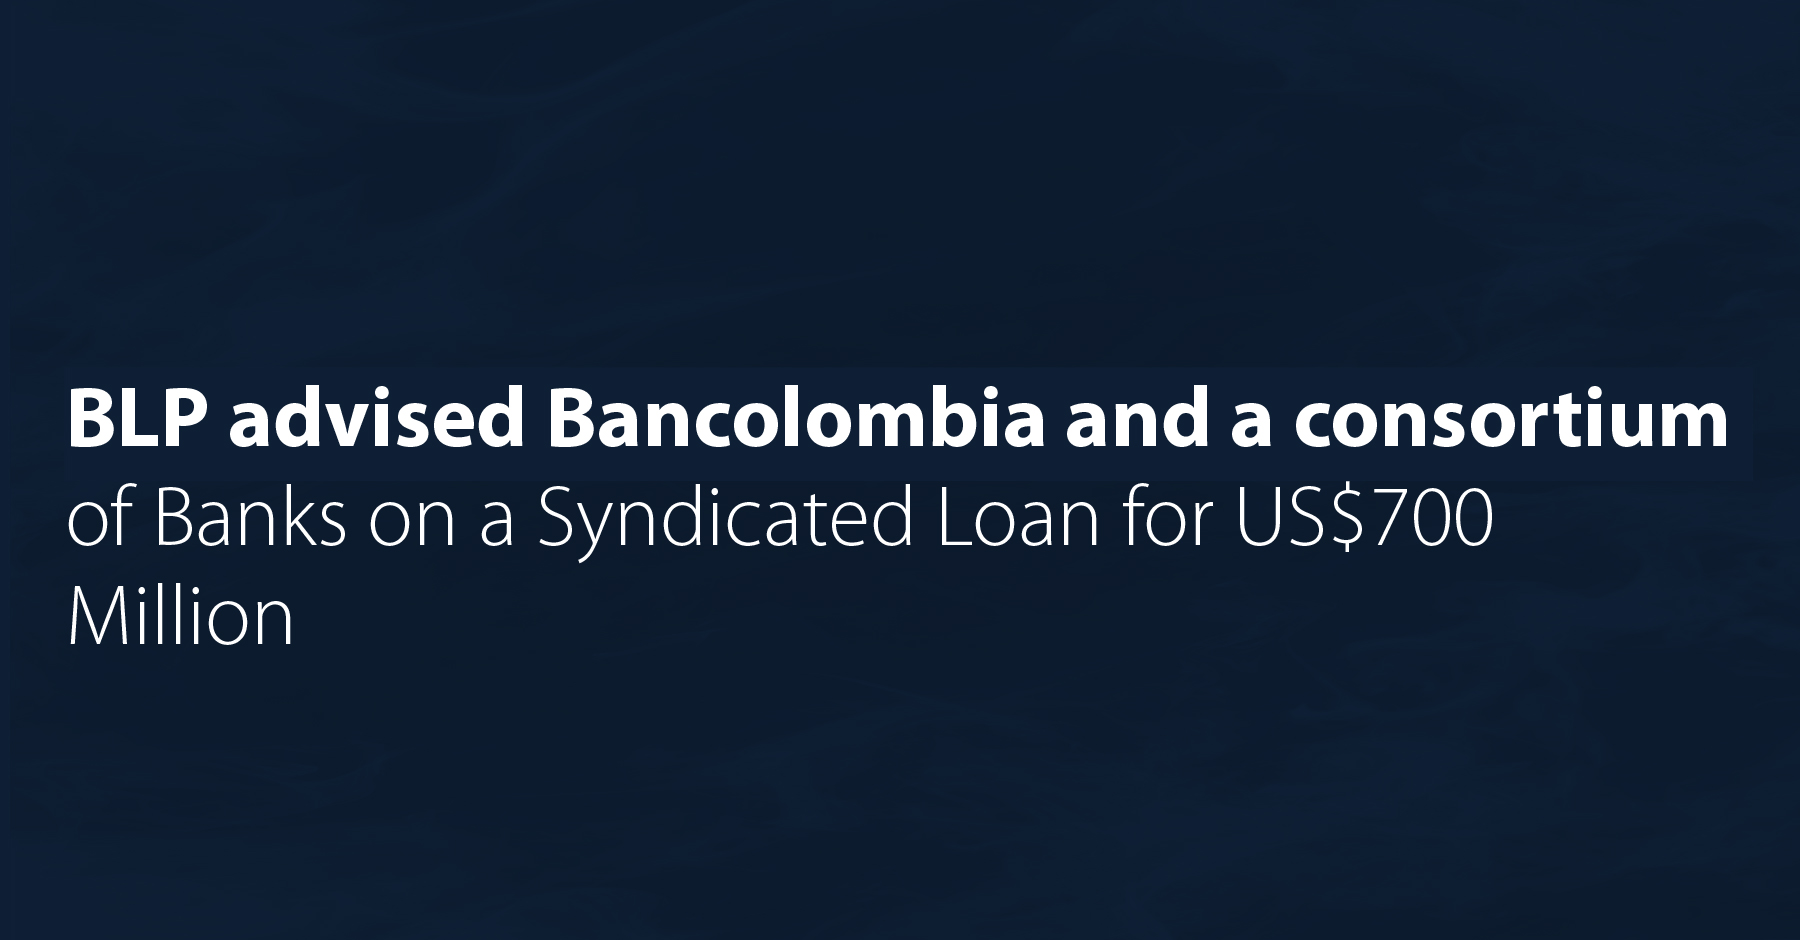 BLP advised Bancolombia and a consortium of Banks on a Syndicated Loan for US$700 Million